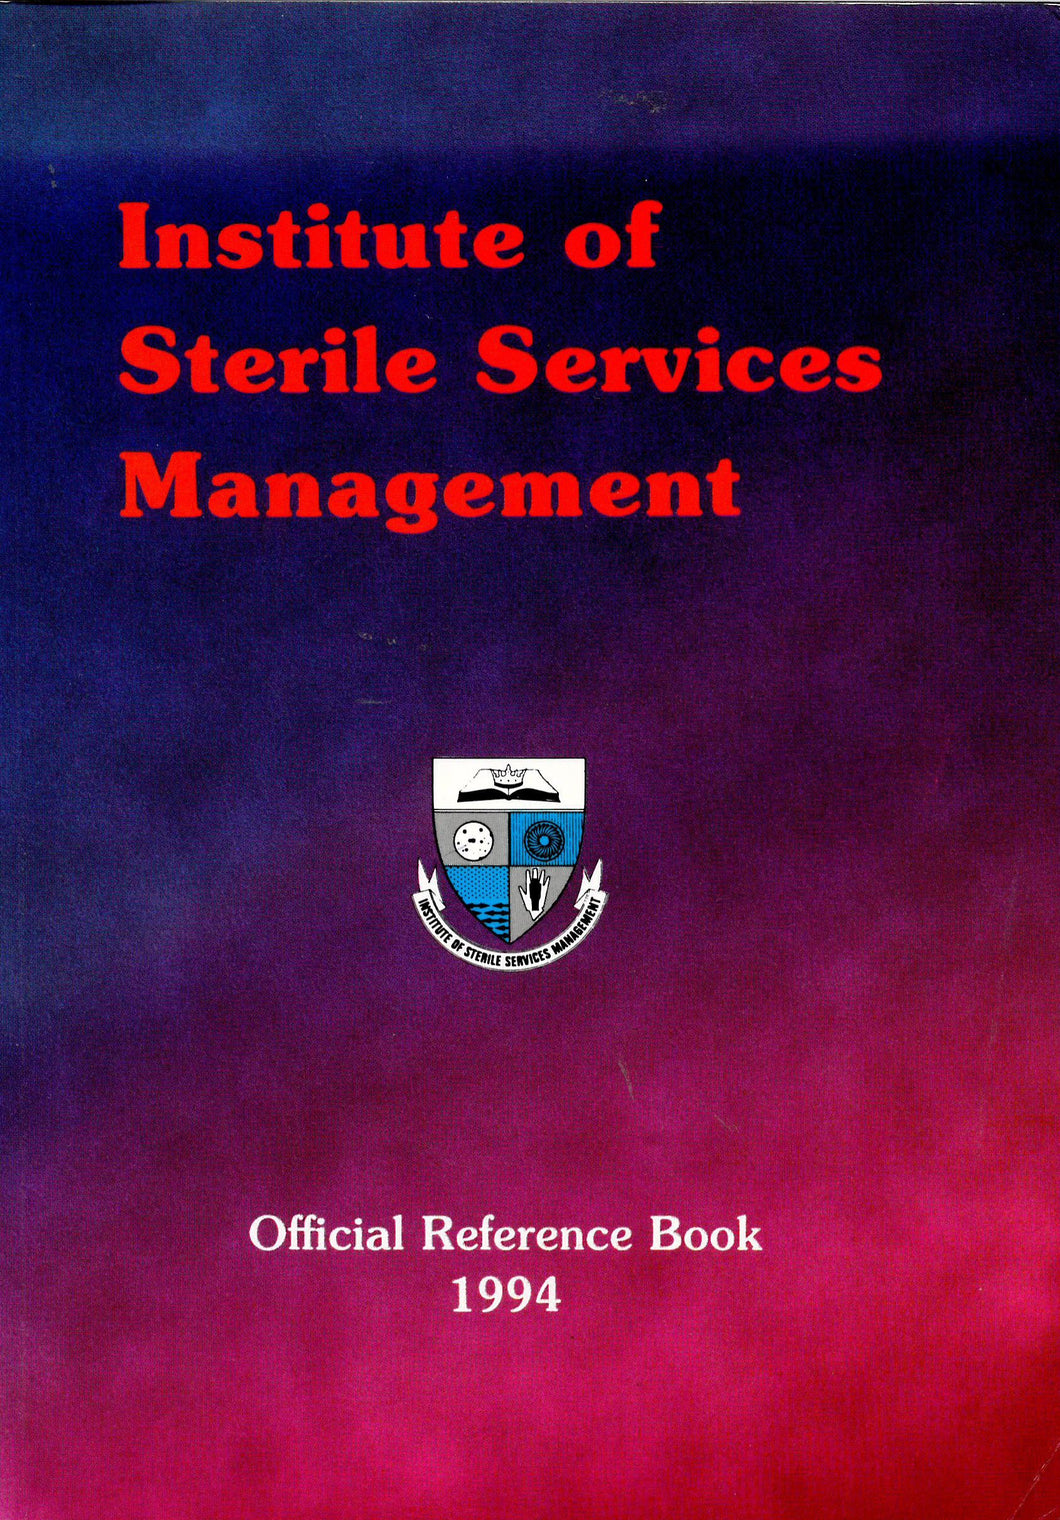 Institute of Sterile Services Management Official Reference Book 1994